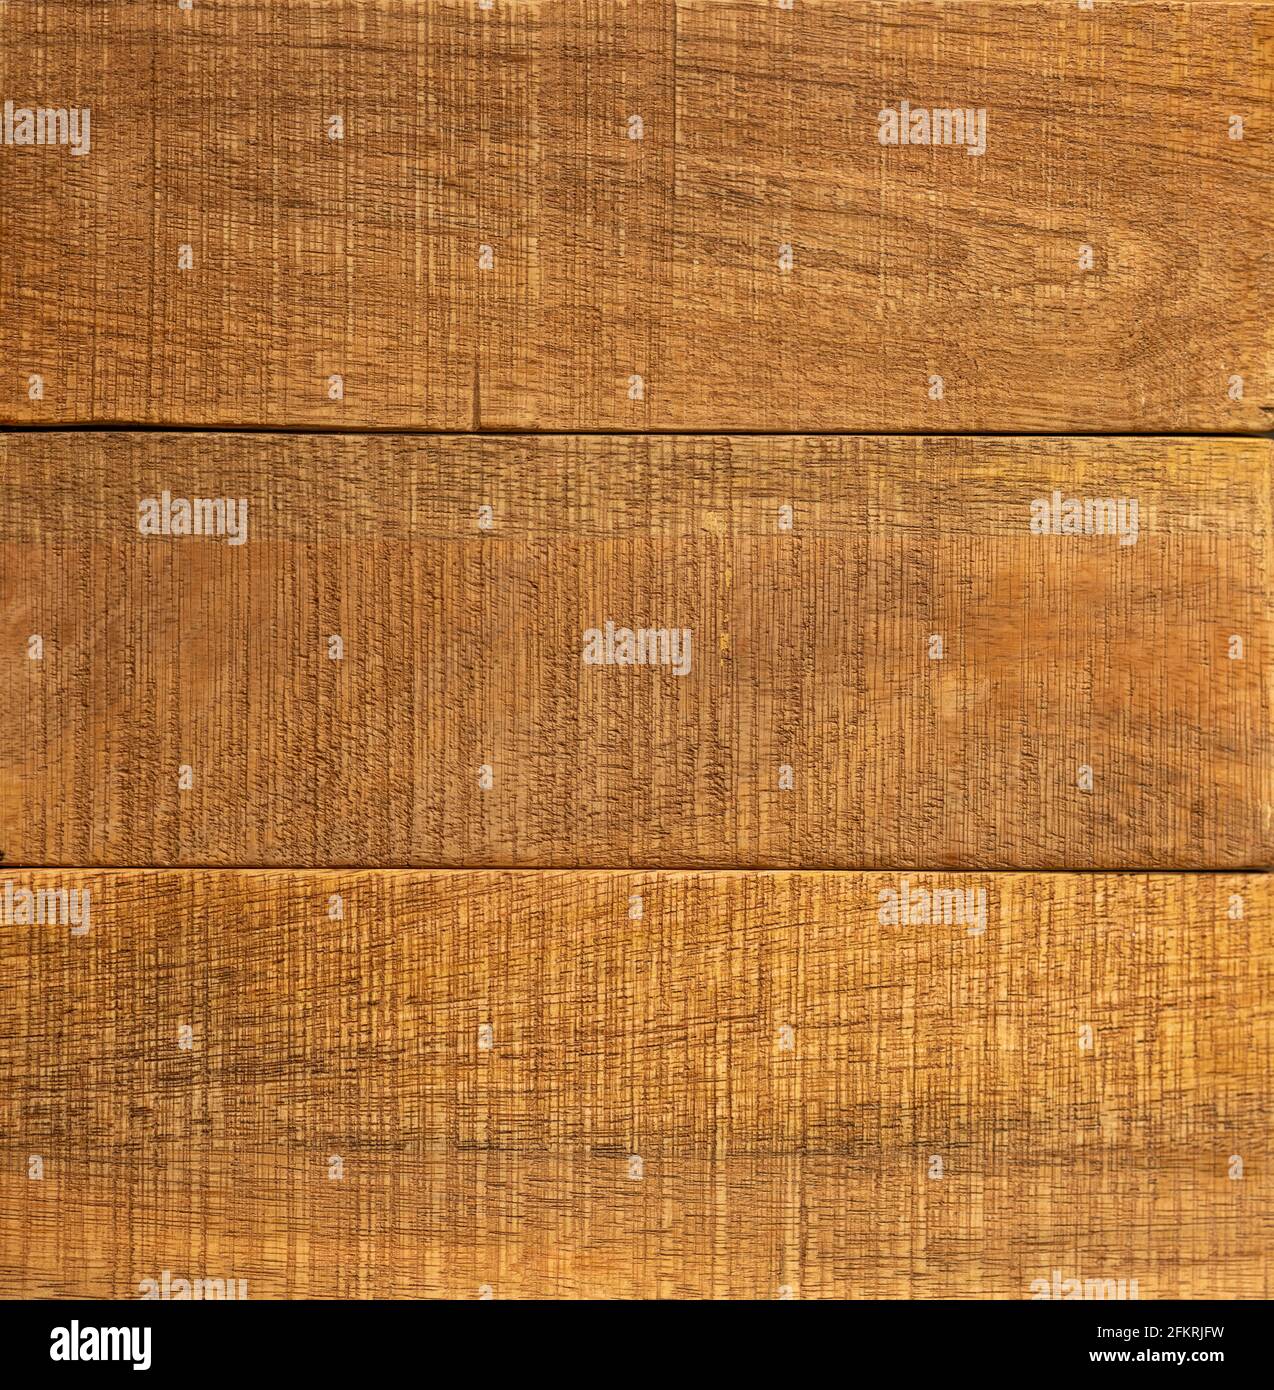 Unprocessed wood texture or background Stock Photo